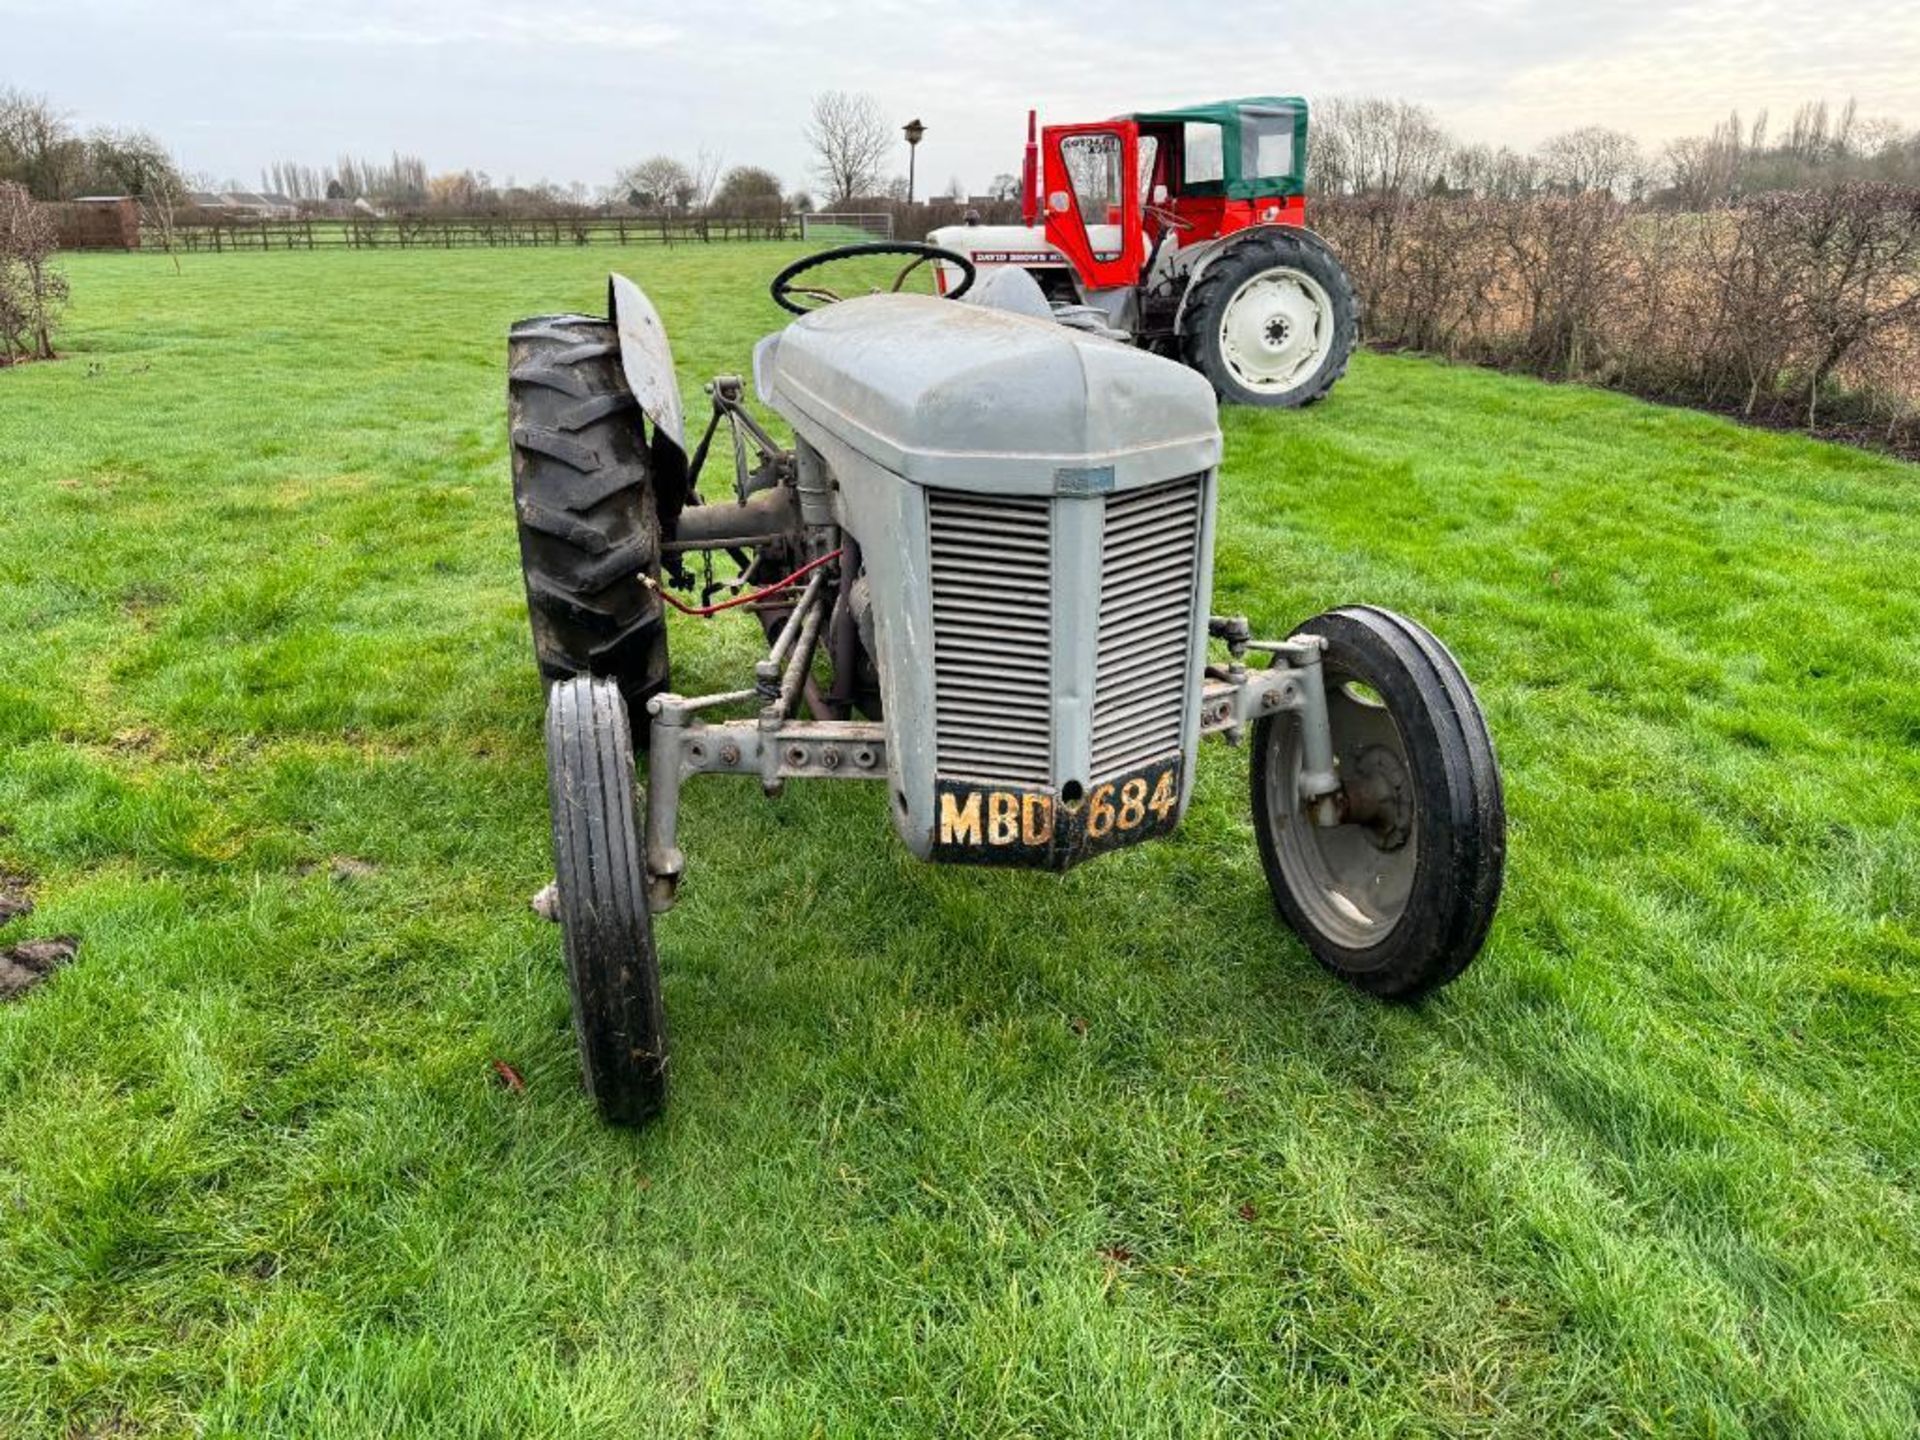 1955 Ferguson TED 2wd petrol paraffin tractor with underslung exhaust and linkage on 12.4-28 rear an - Image 7 of 11